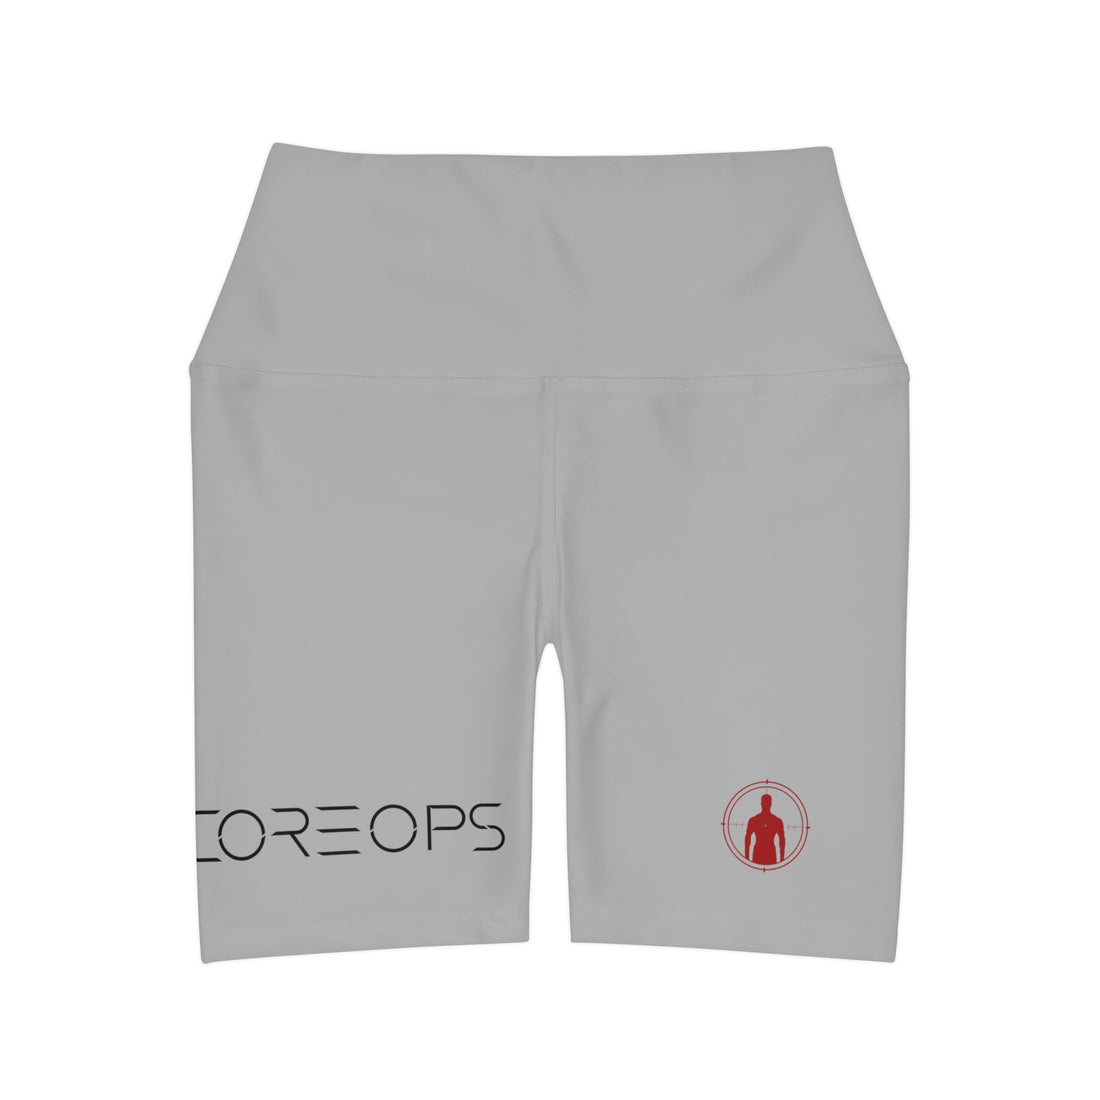 CoreOps High Waisted Shorts